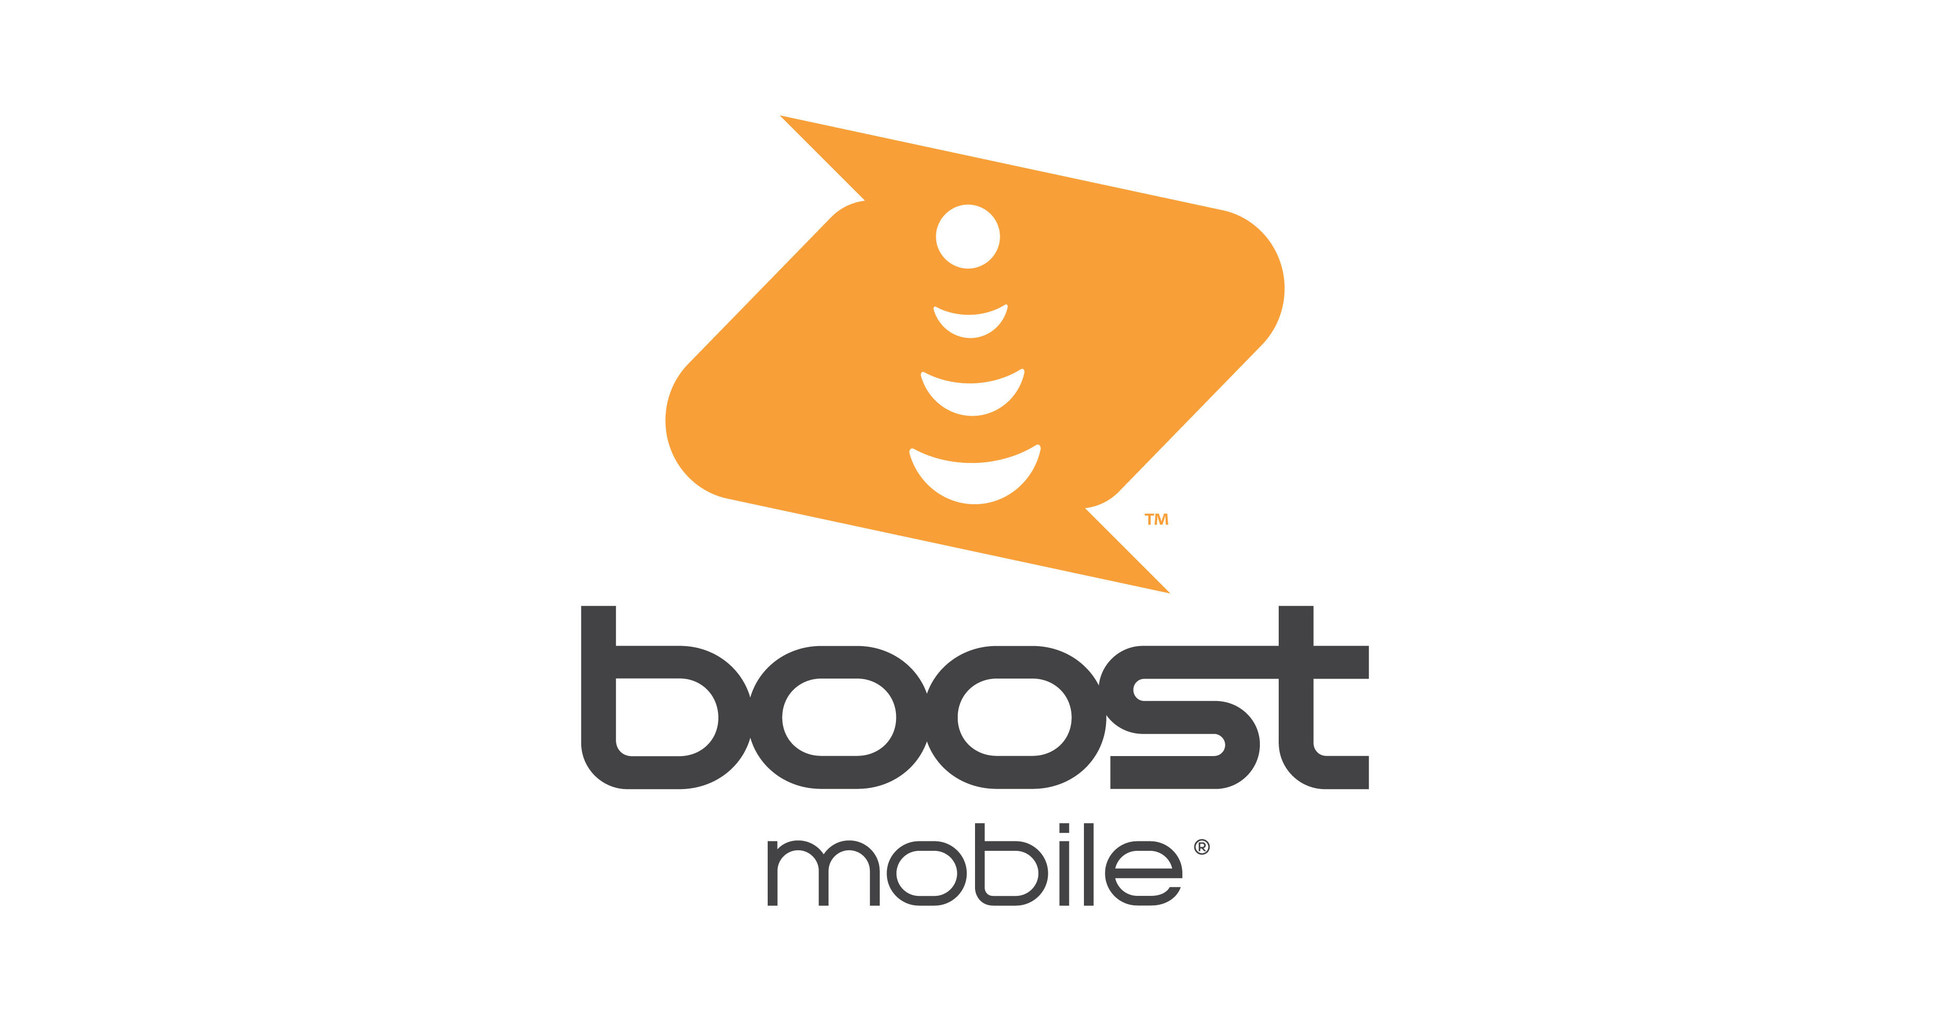 The Boost Mobile logo